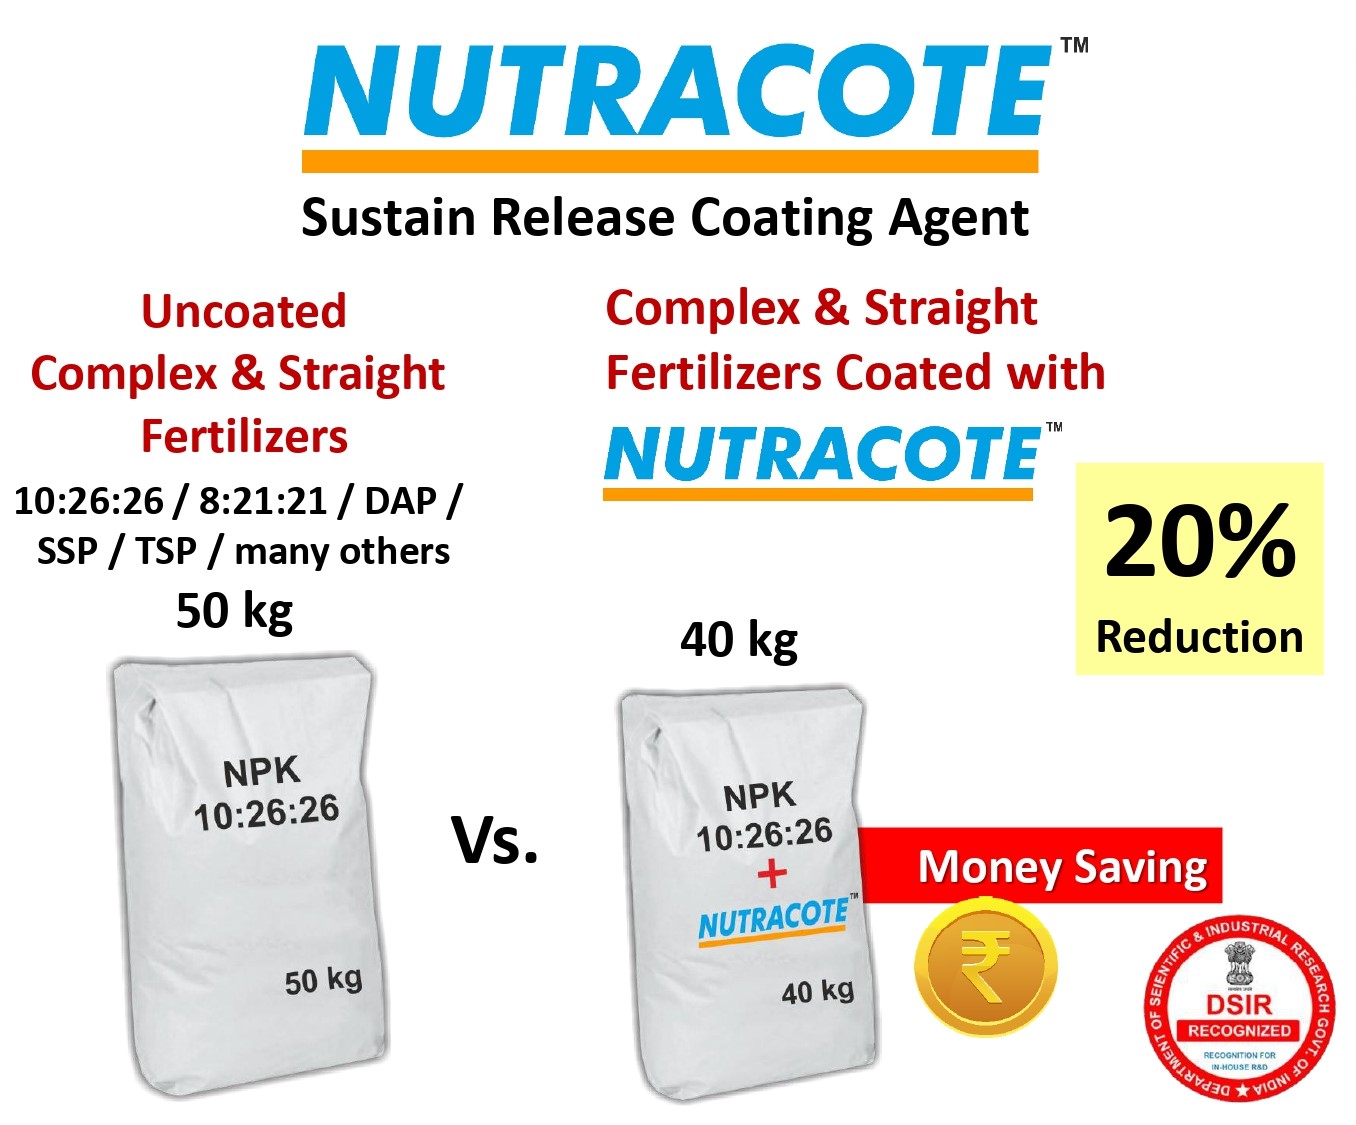 NUTRACOTE